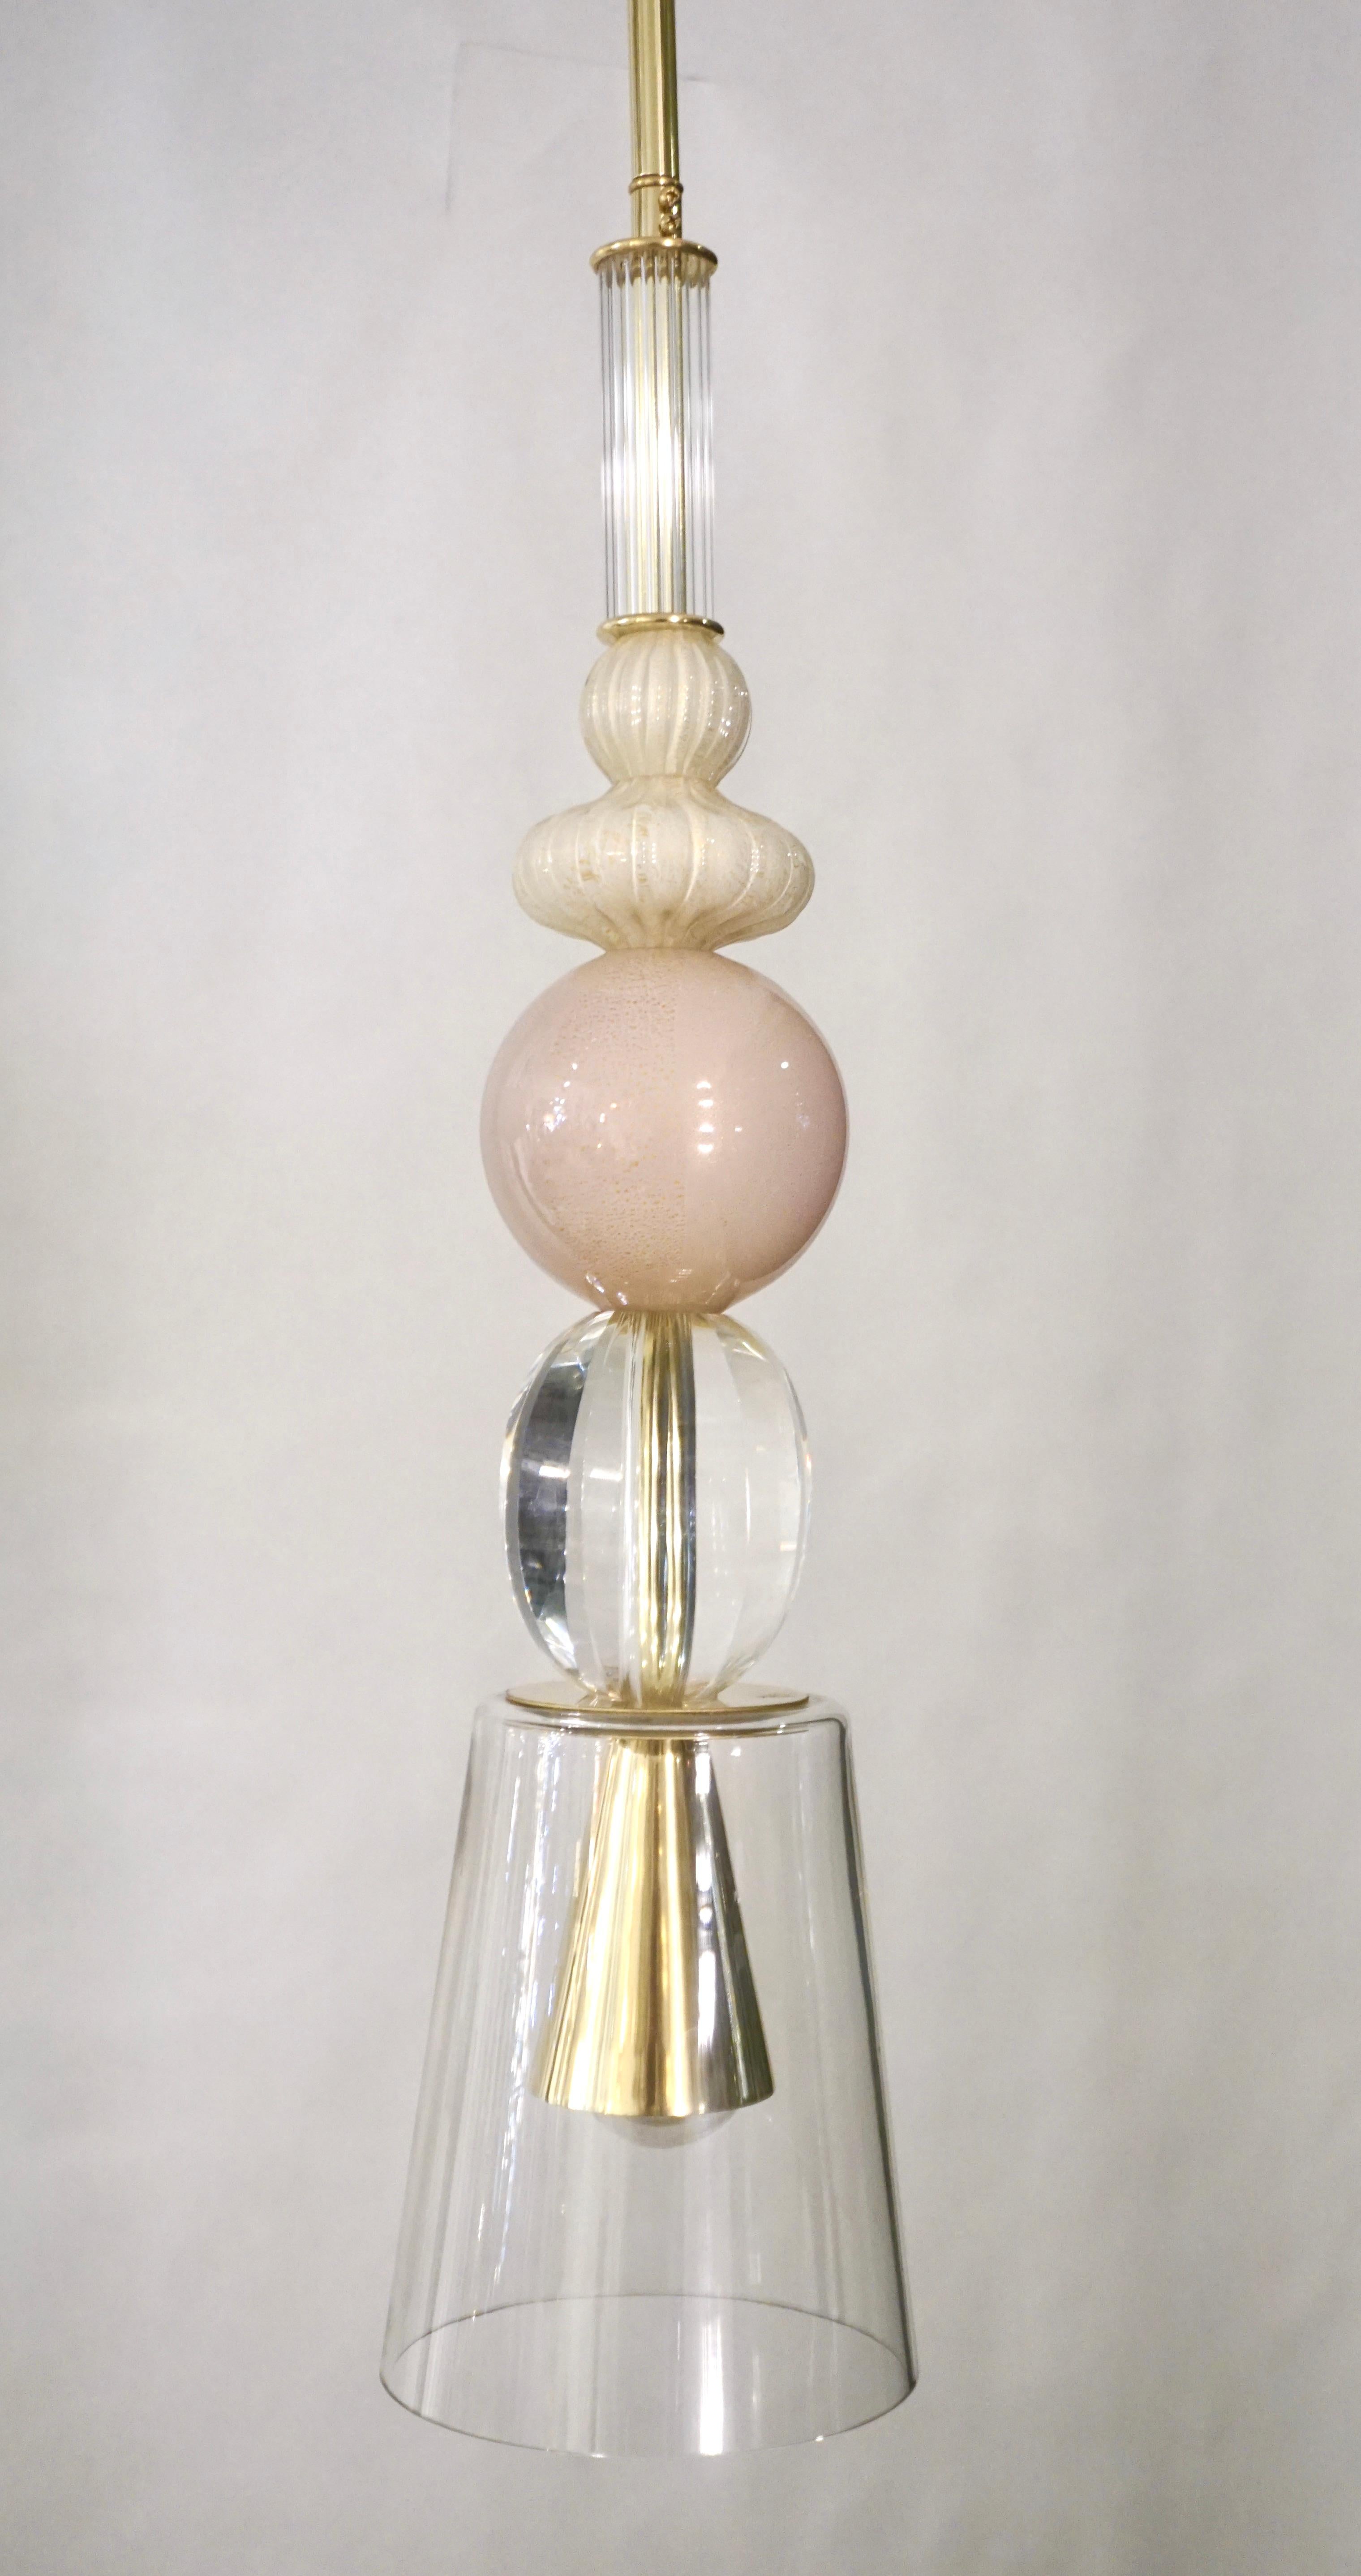 Fun and elegant Italian lantern pendant chandelier, entirely handcrafted, of organic modern design consisting of a succession of elements: reeded crystal Murano glass cylinder, opaline cream glass spheres overlaid in clear crystal worked with